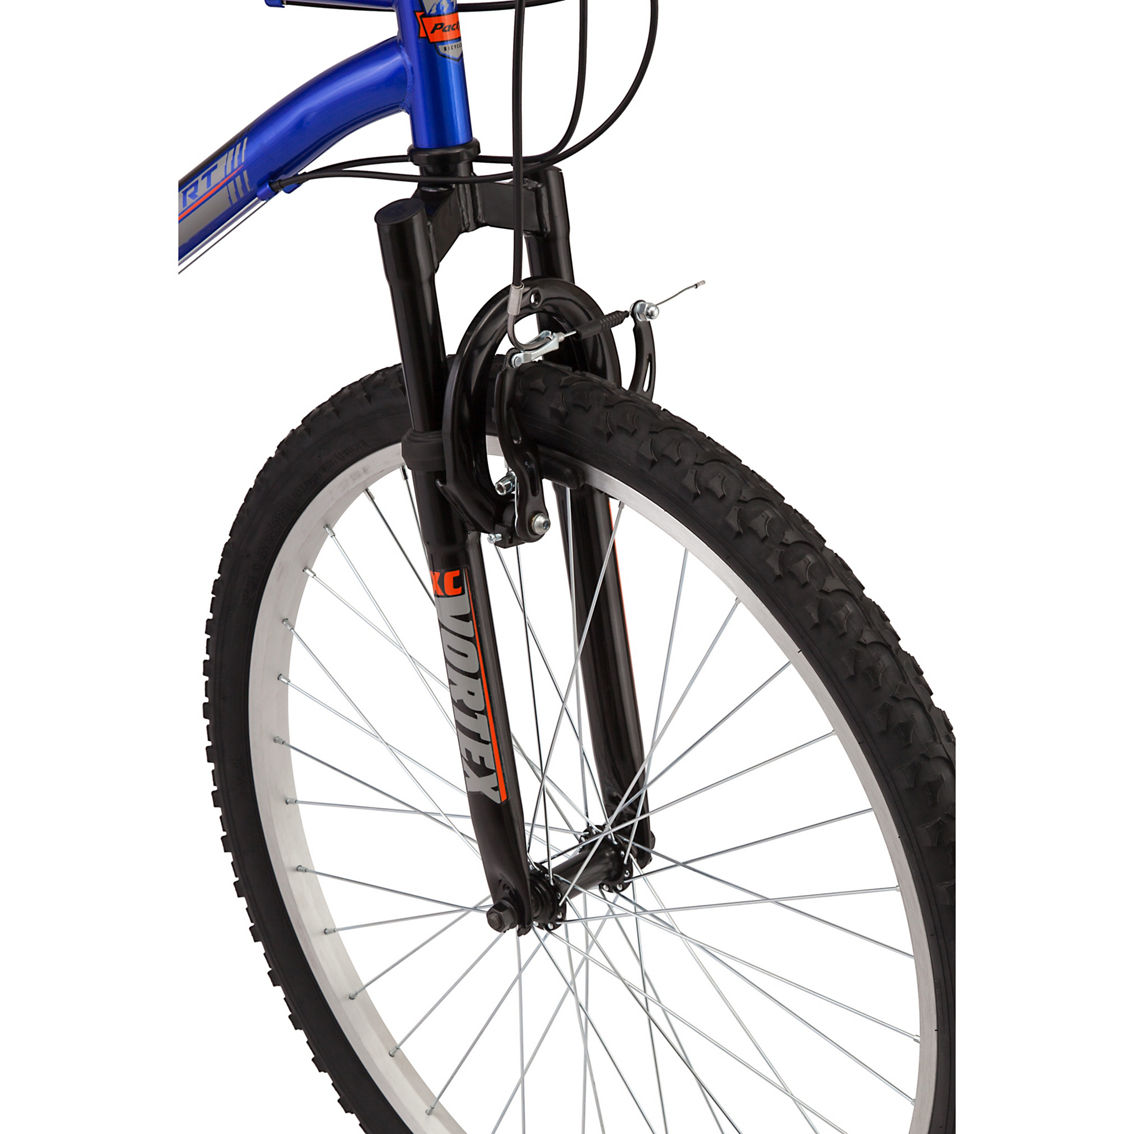 Pacific Men's Mountain Sport 26 in. Front Suspension Mountain Bike - Image 4 of 10